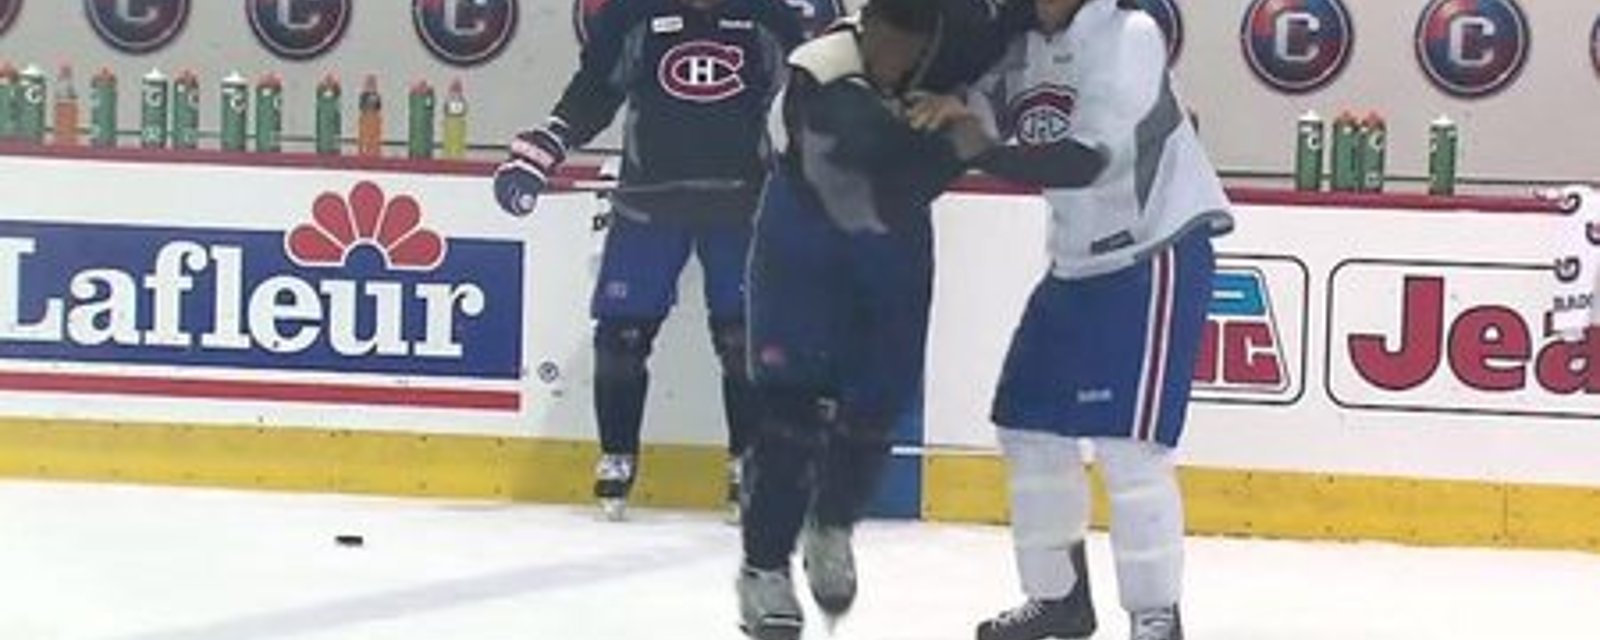 Prust reveals he got traded out of Montreal for fighting Subban on team bus